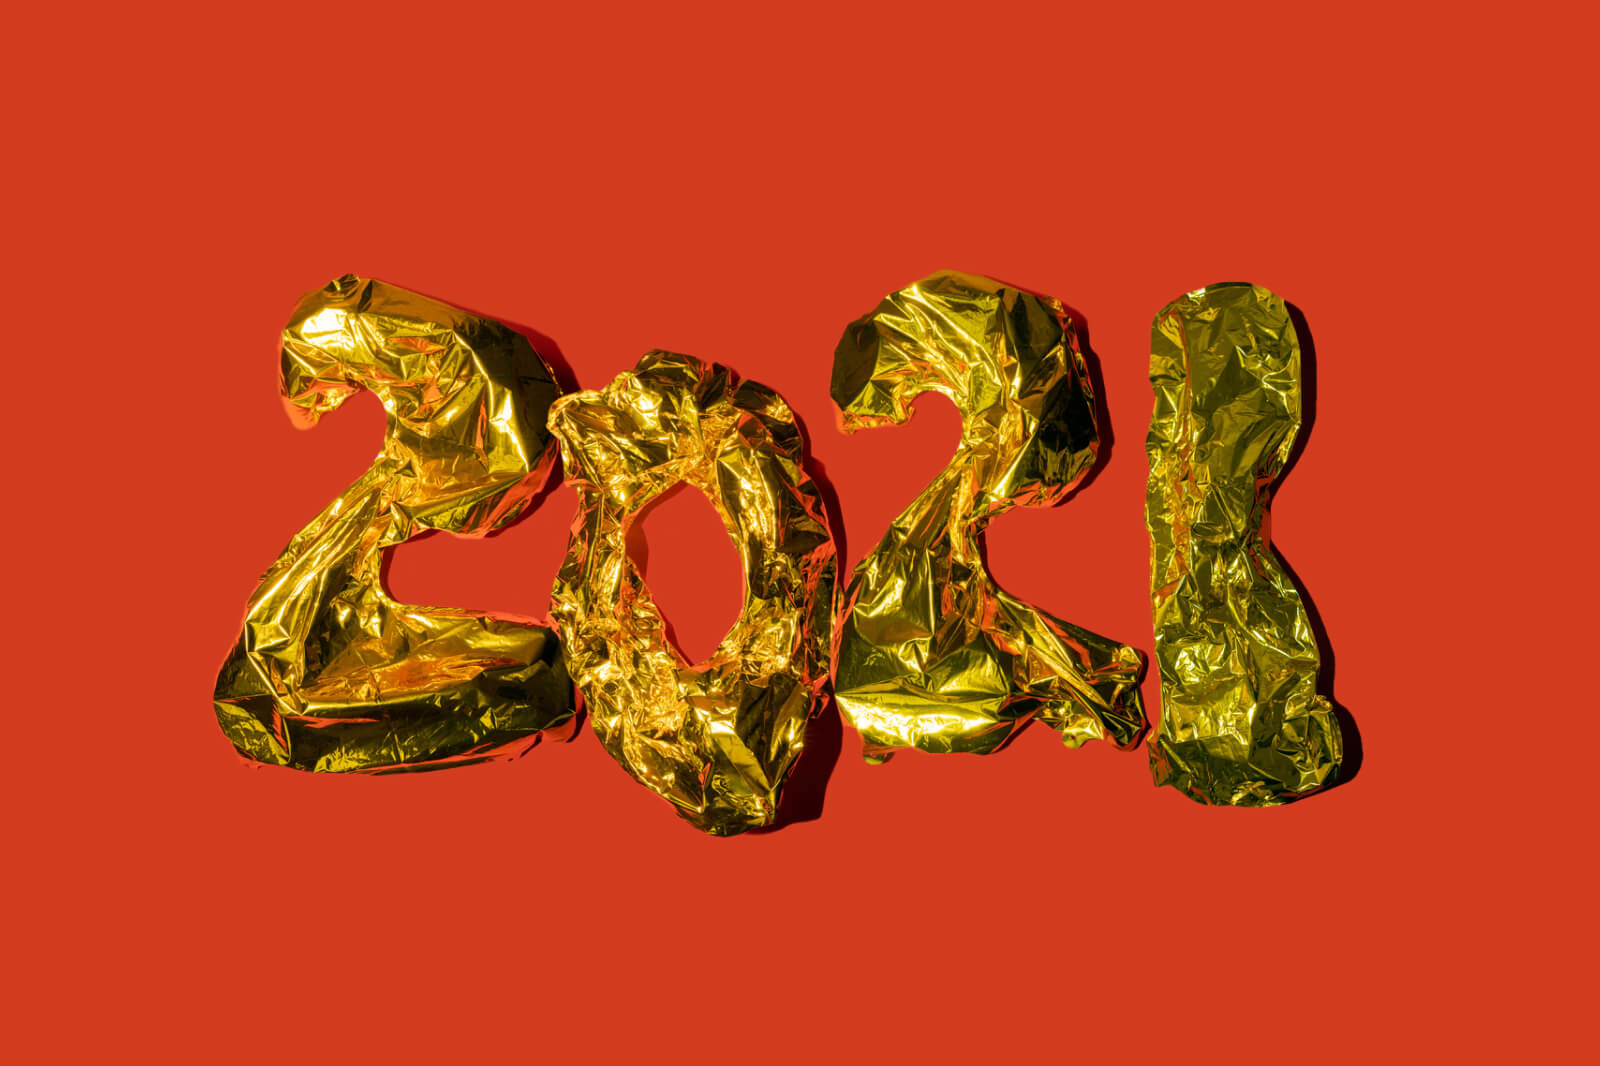 an illustrative header image for Slido's blog post listing the good things that happened in 2021 depicting the number 2021 cutout from paper